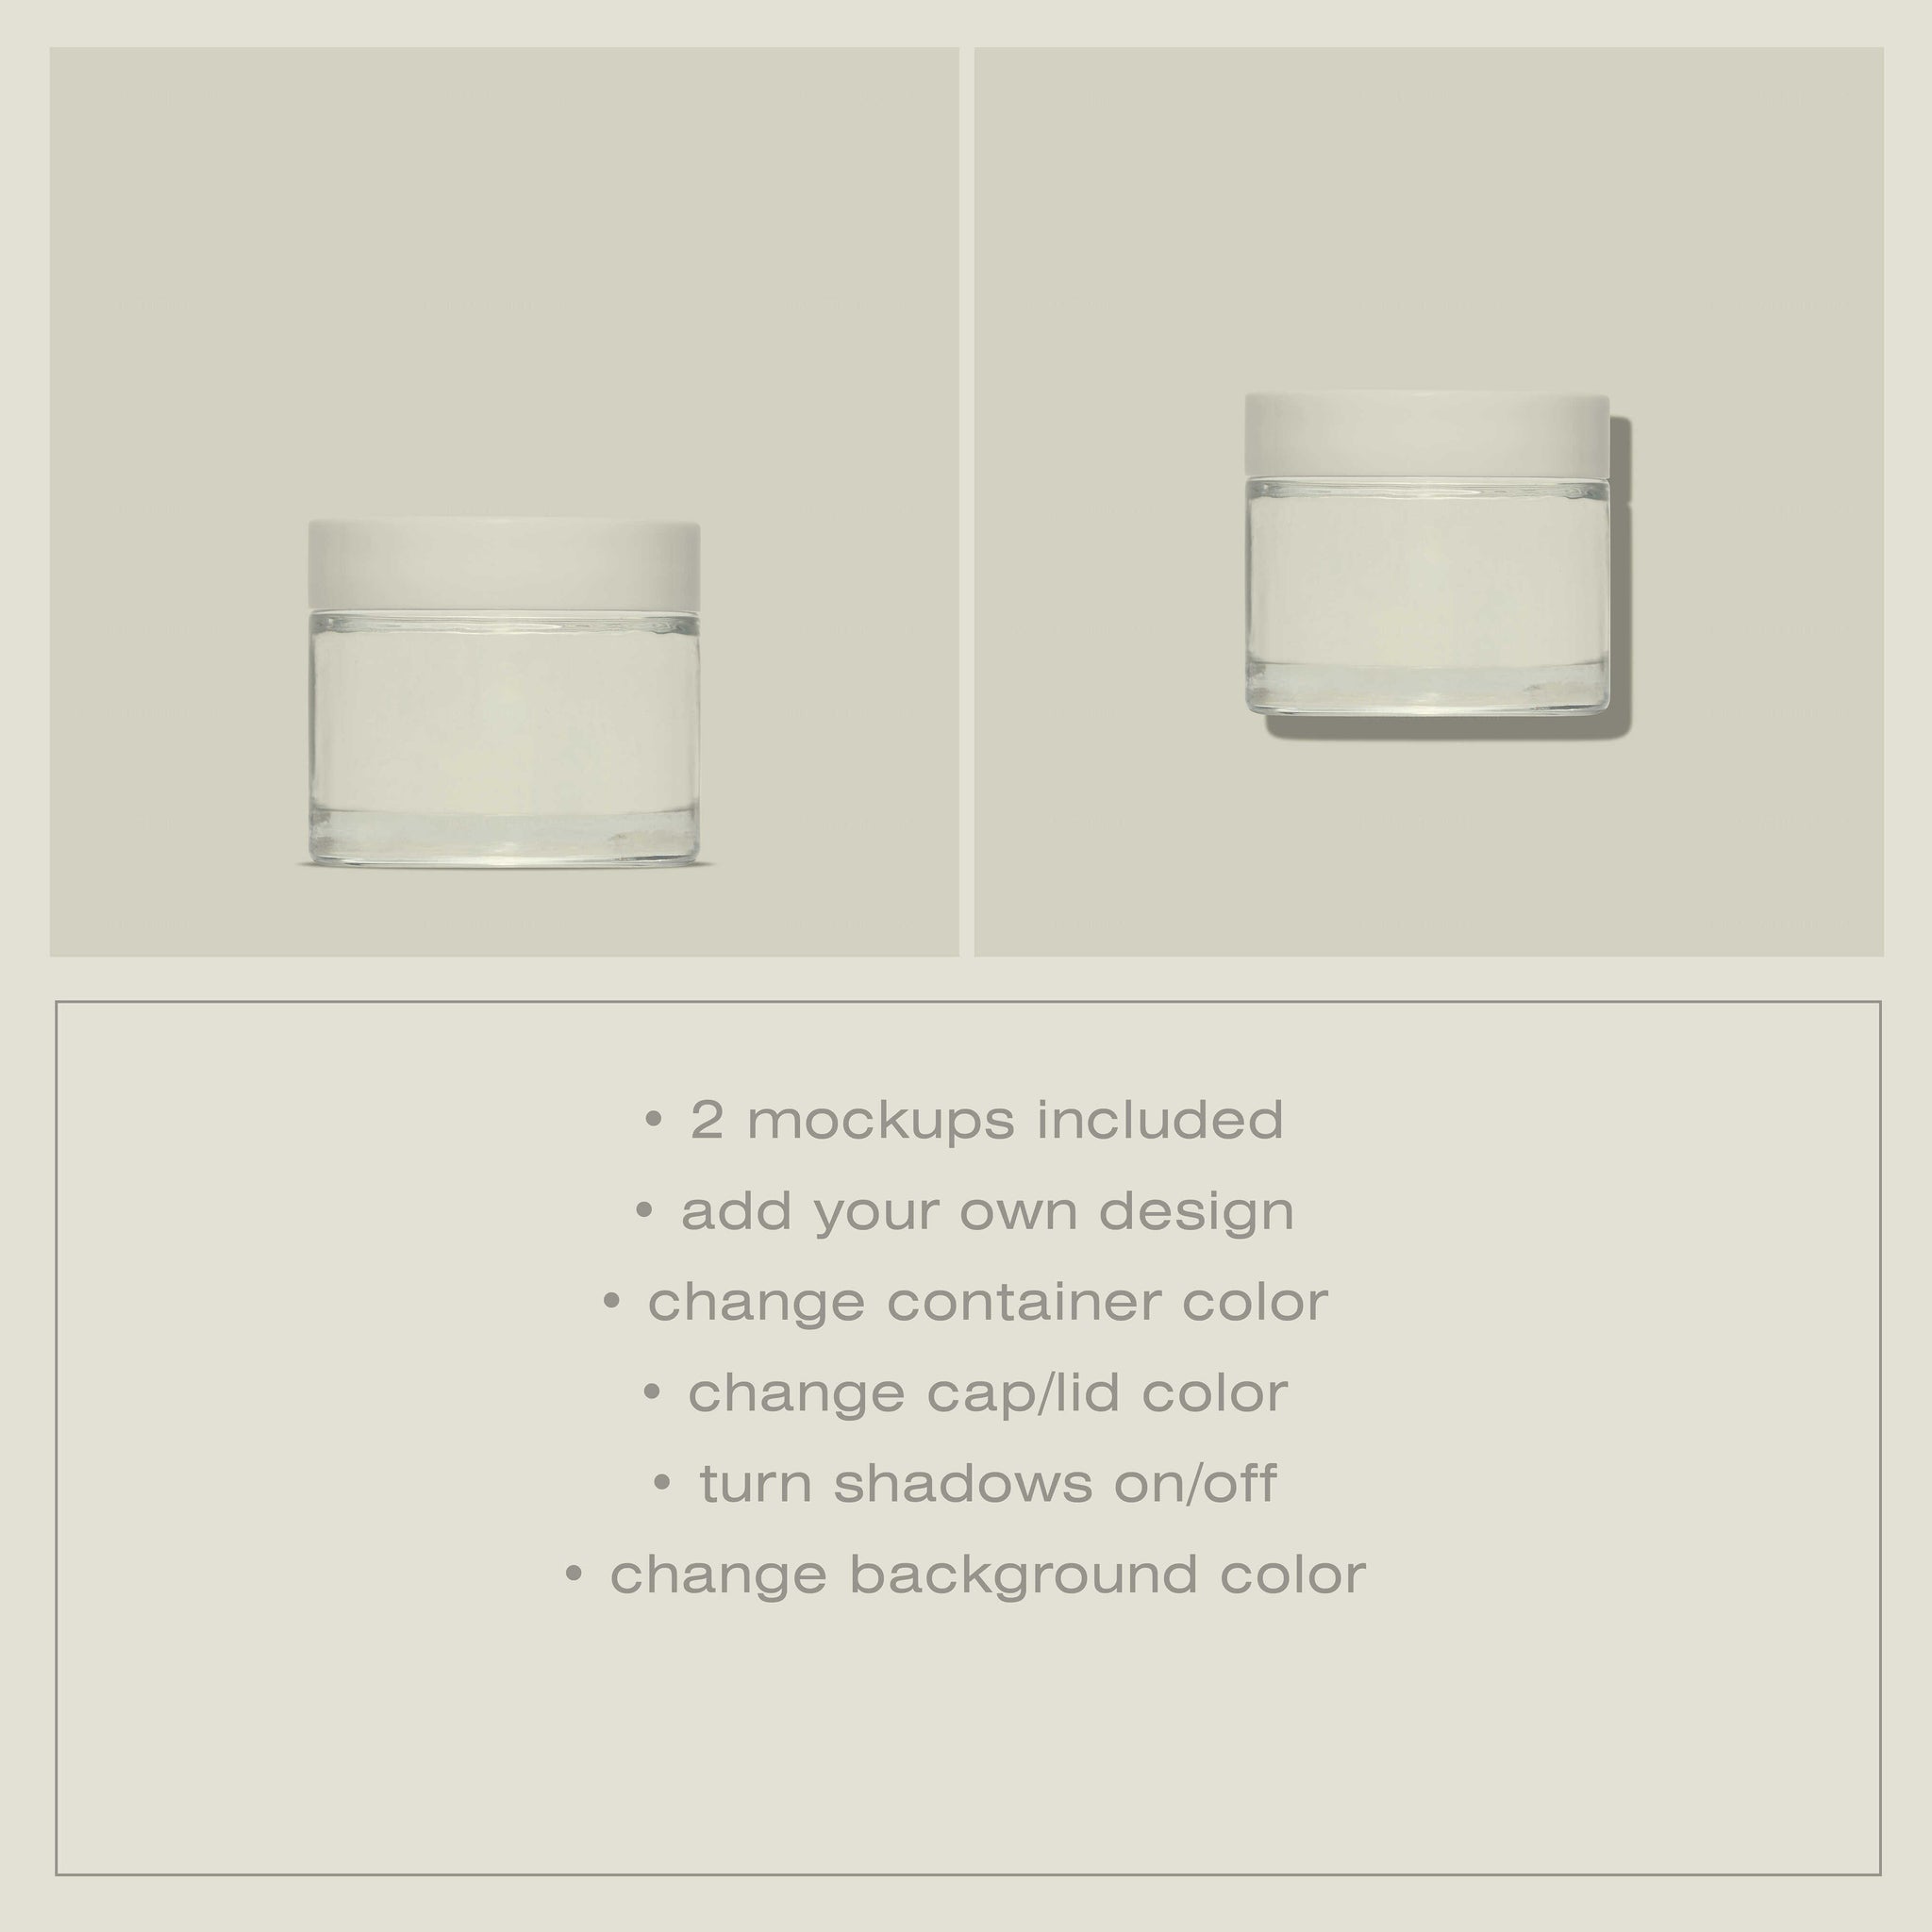 Cosmetic Container Mockup No. 3 - Copal Studio Packaging Mockups For Designers